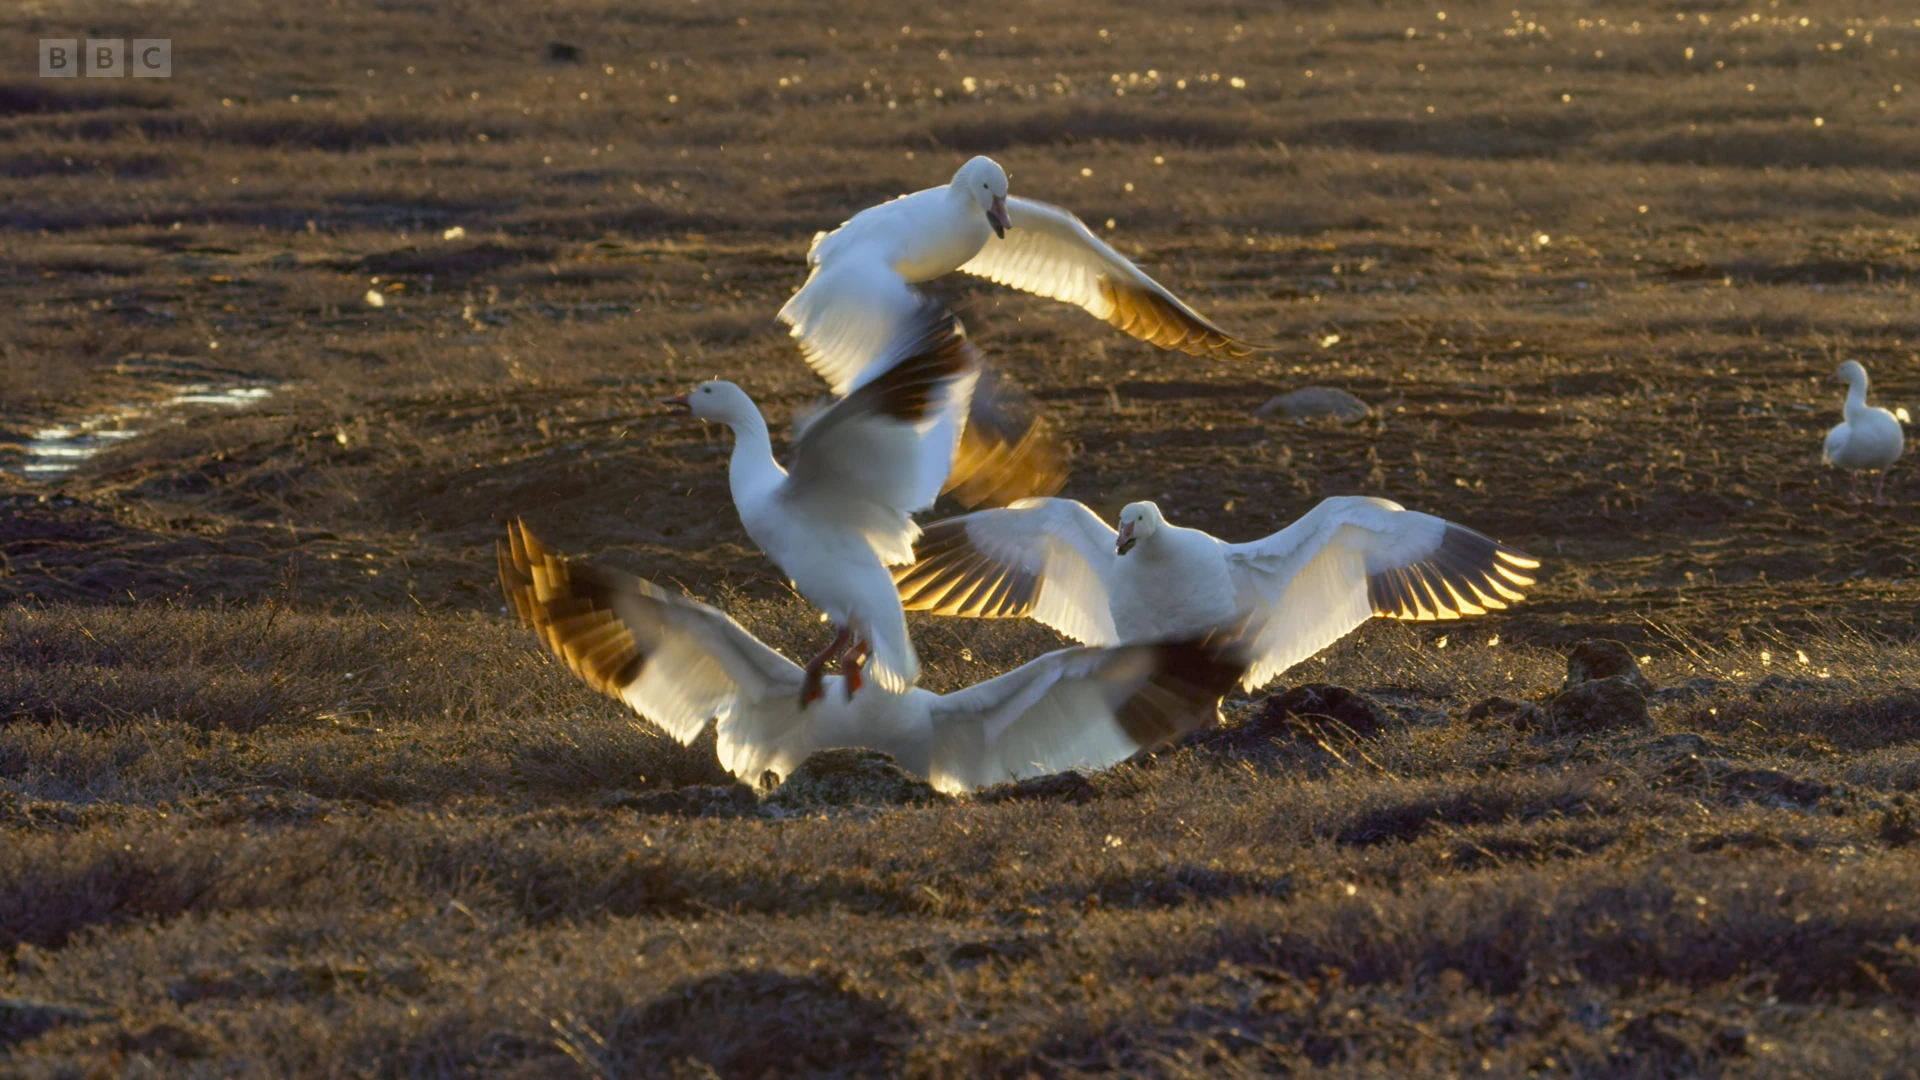 Lesser snow goose (Anser caerulescens caerulescens) as shown in A Perfect Planet - The Sun